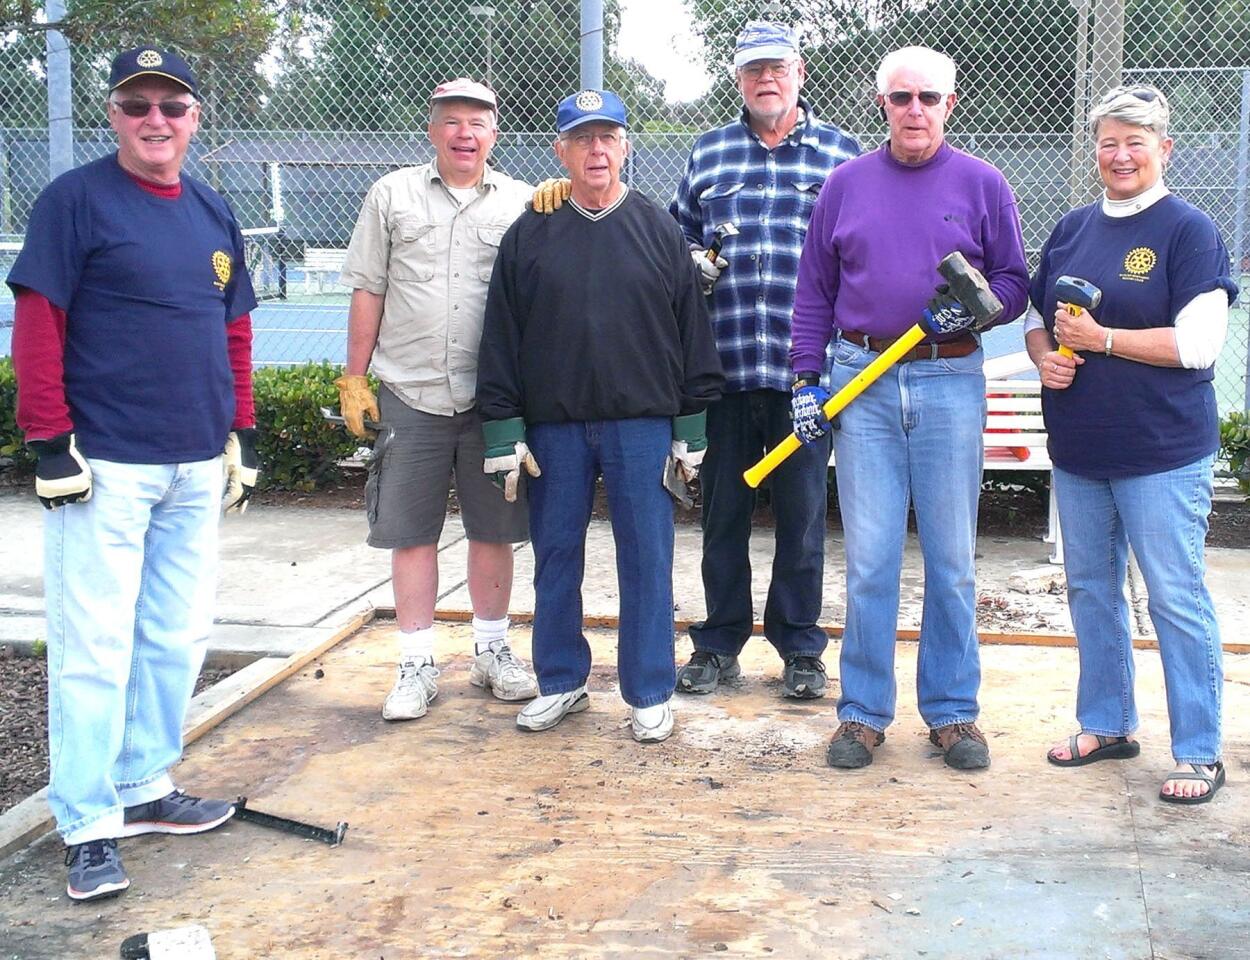 Among those demolishing the old storage shed at the Ed Brown Senior Center were Rancho Bernardo Rotarians, from left, Ron Hunt, John Goodrich, Paul Donnick, Larry Saunders, Dan Malloy and Cathy Glover.